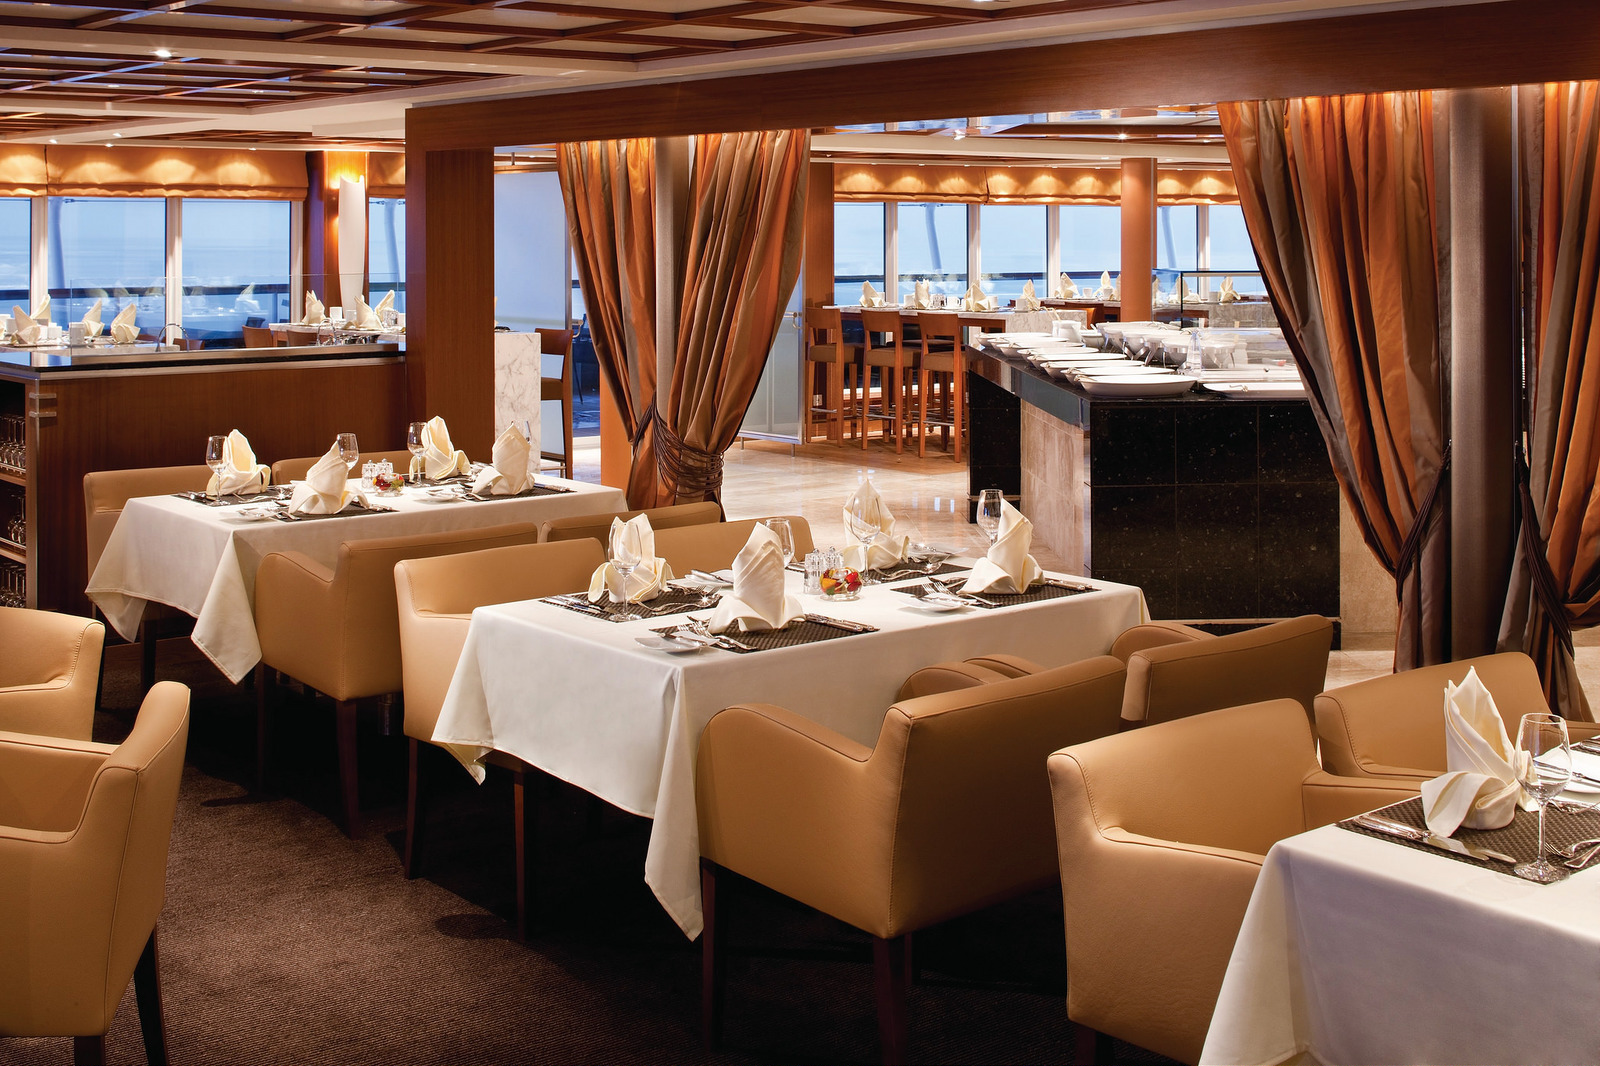 The Colonnade - Seabourn Odyssey